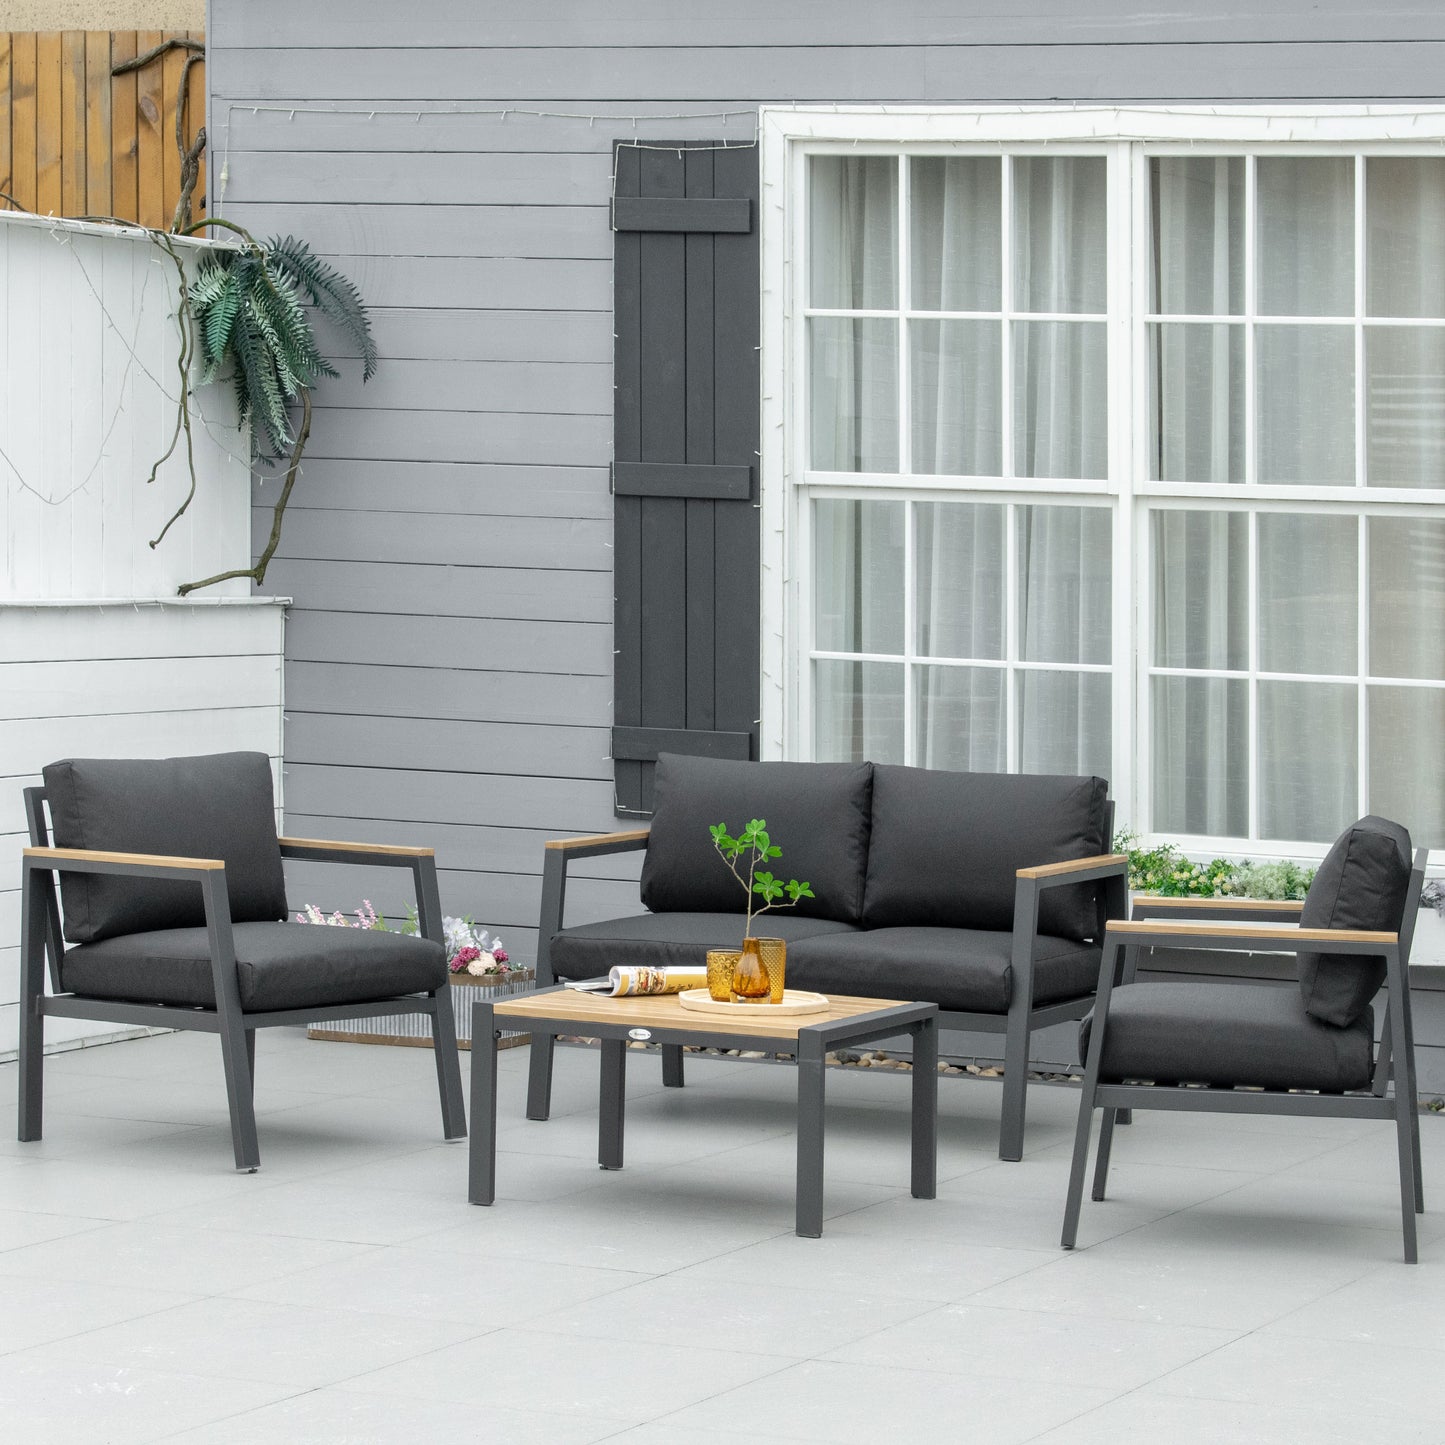 Outsunny 4 Piece Garden Sofa Set with Padded Cushions, 4-Seater Aluminium Outdoor Conversation Furniture Set with Coffee Table, Grey